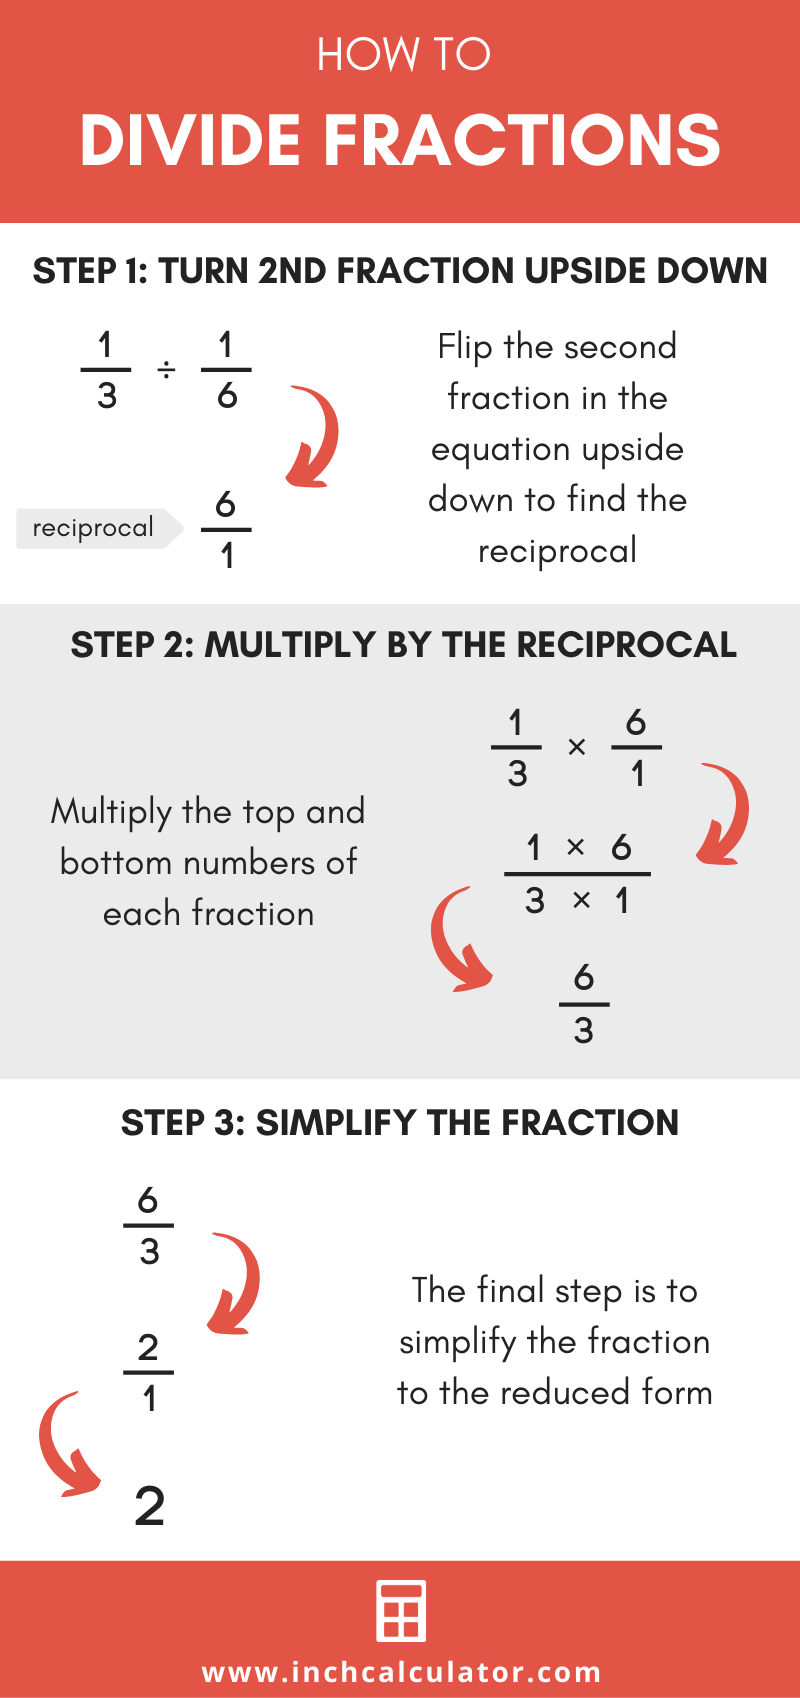 Illustration showing how to divide two fractions step-by-step